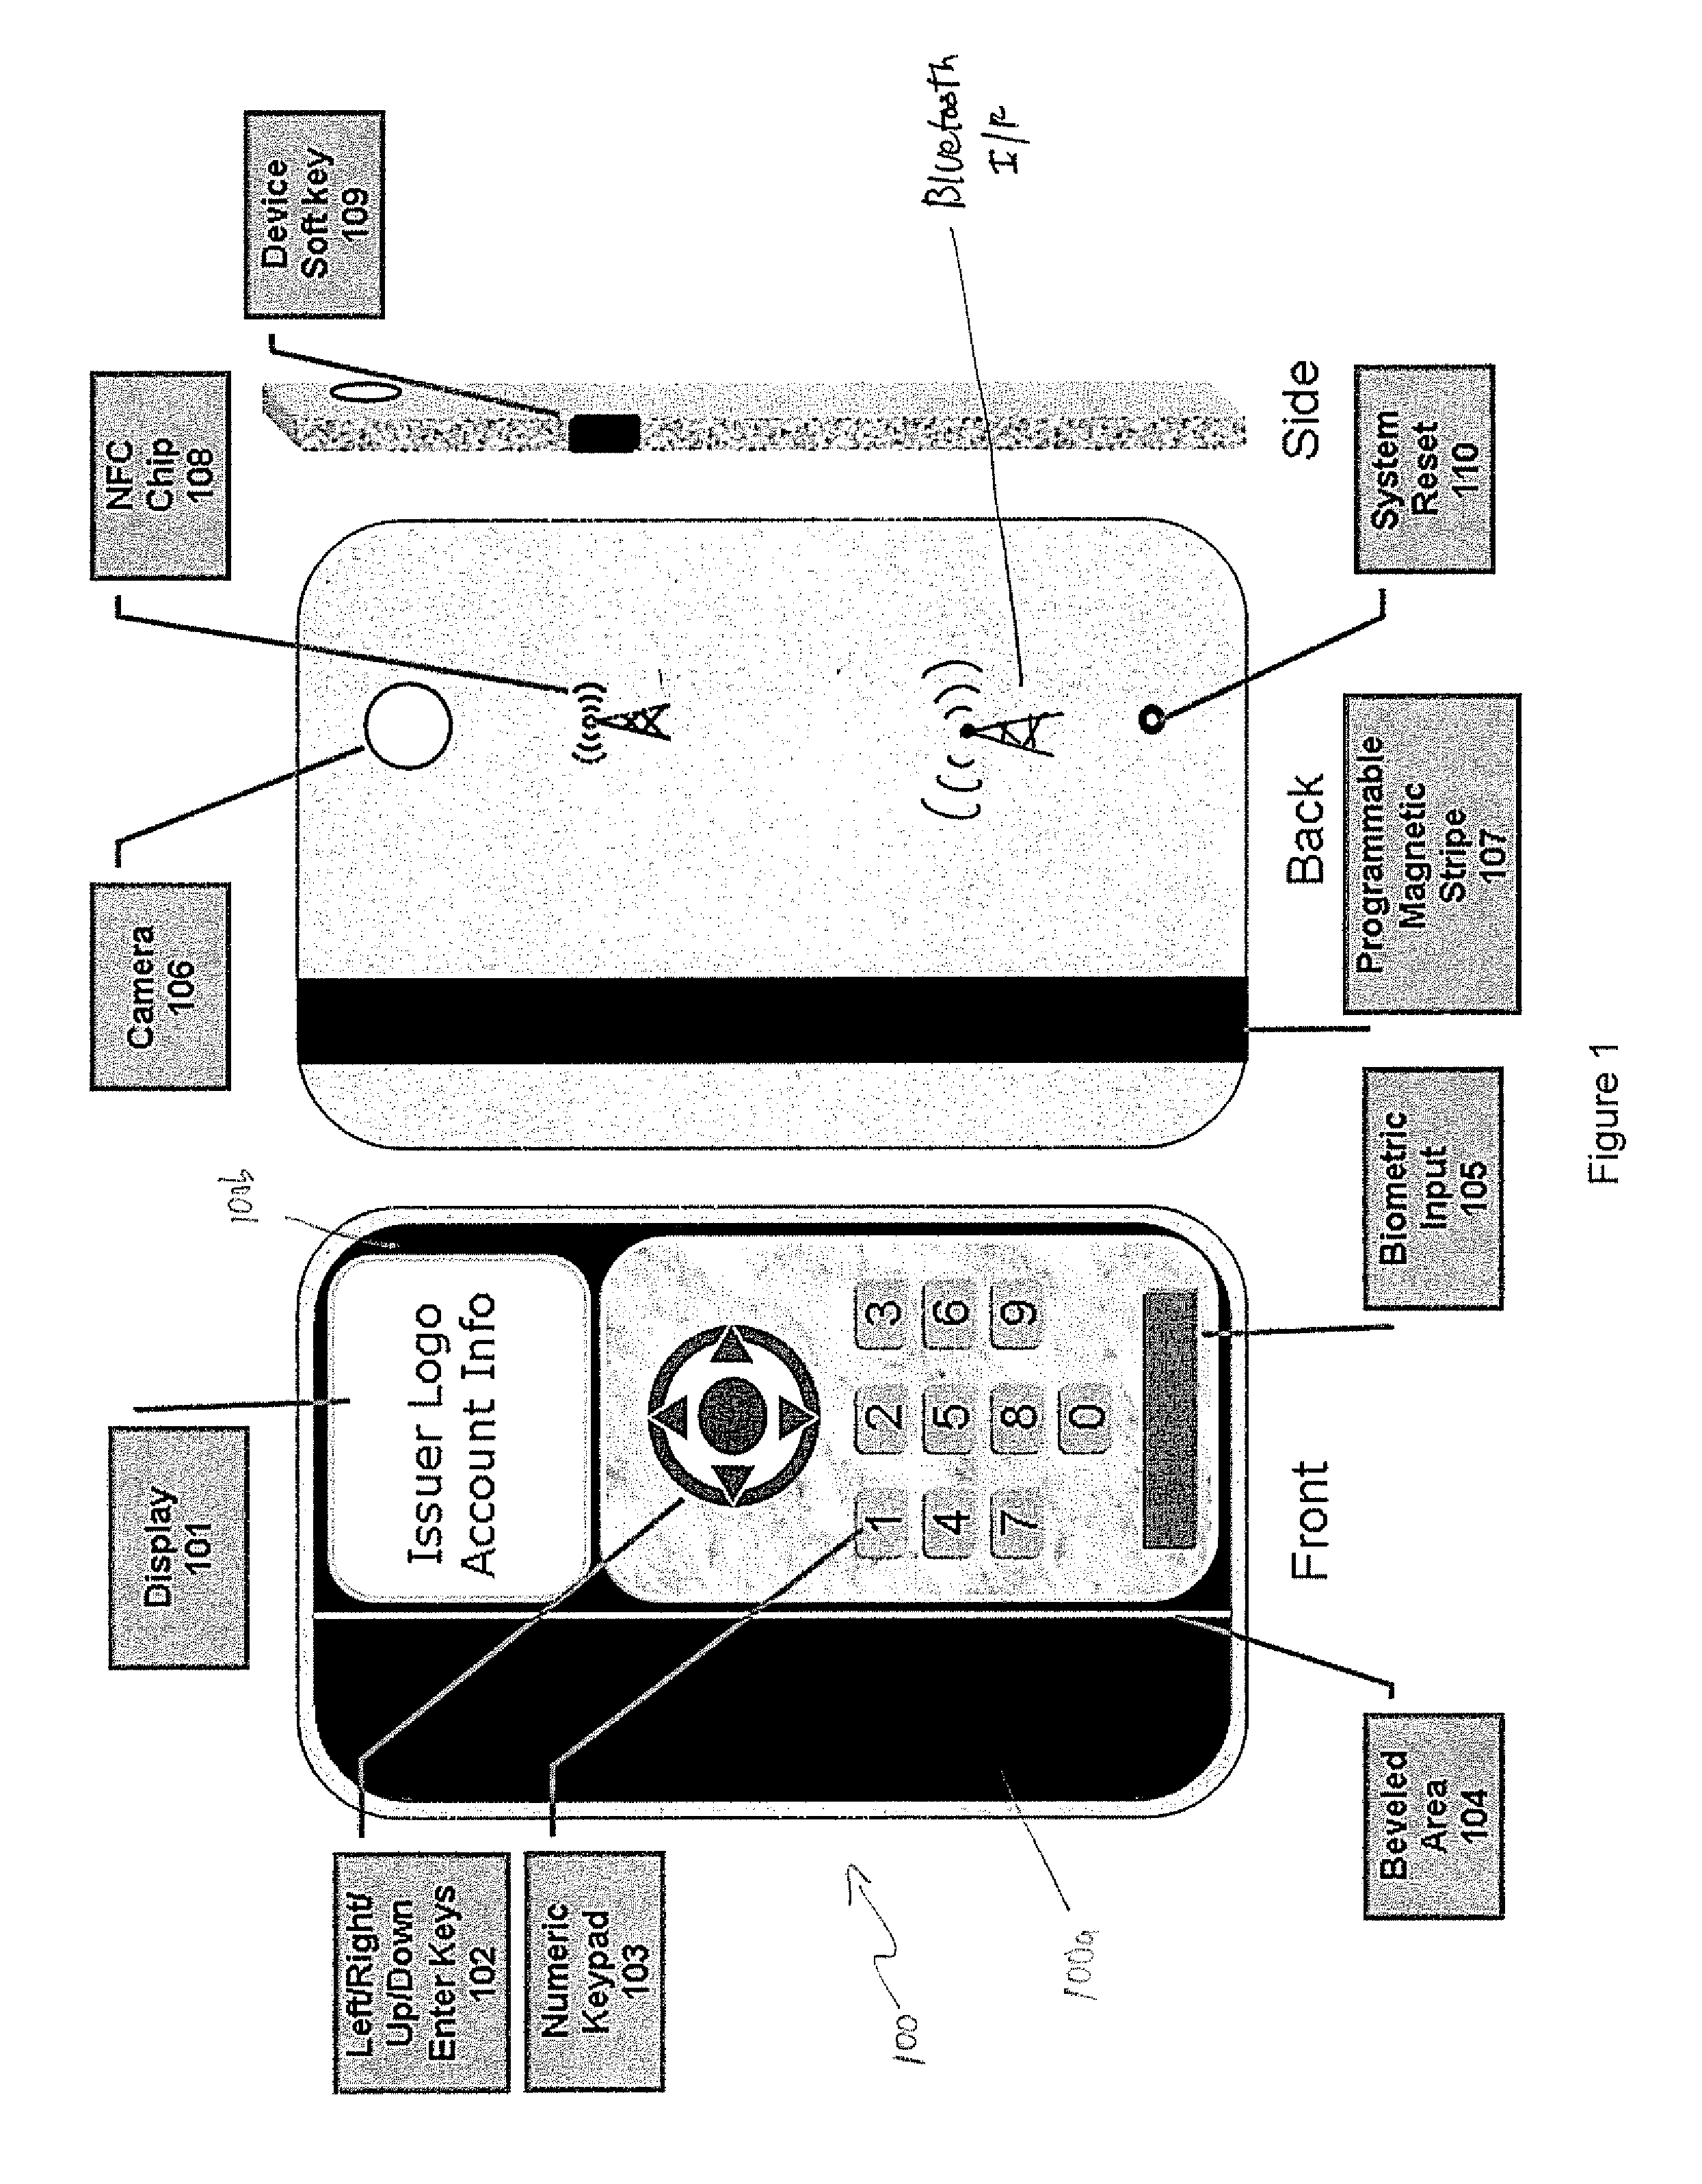 Smartcard and magnetic stripe emulator with biometric authentication